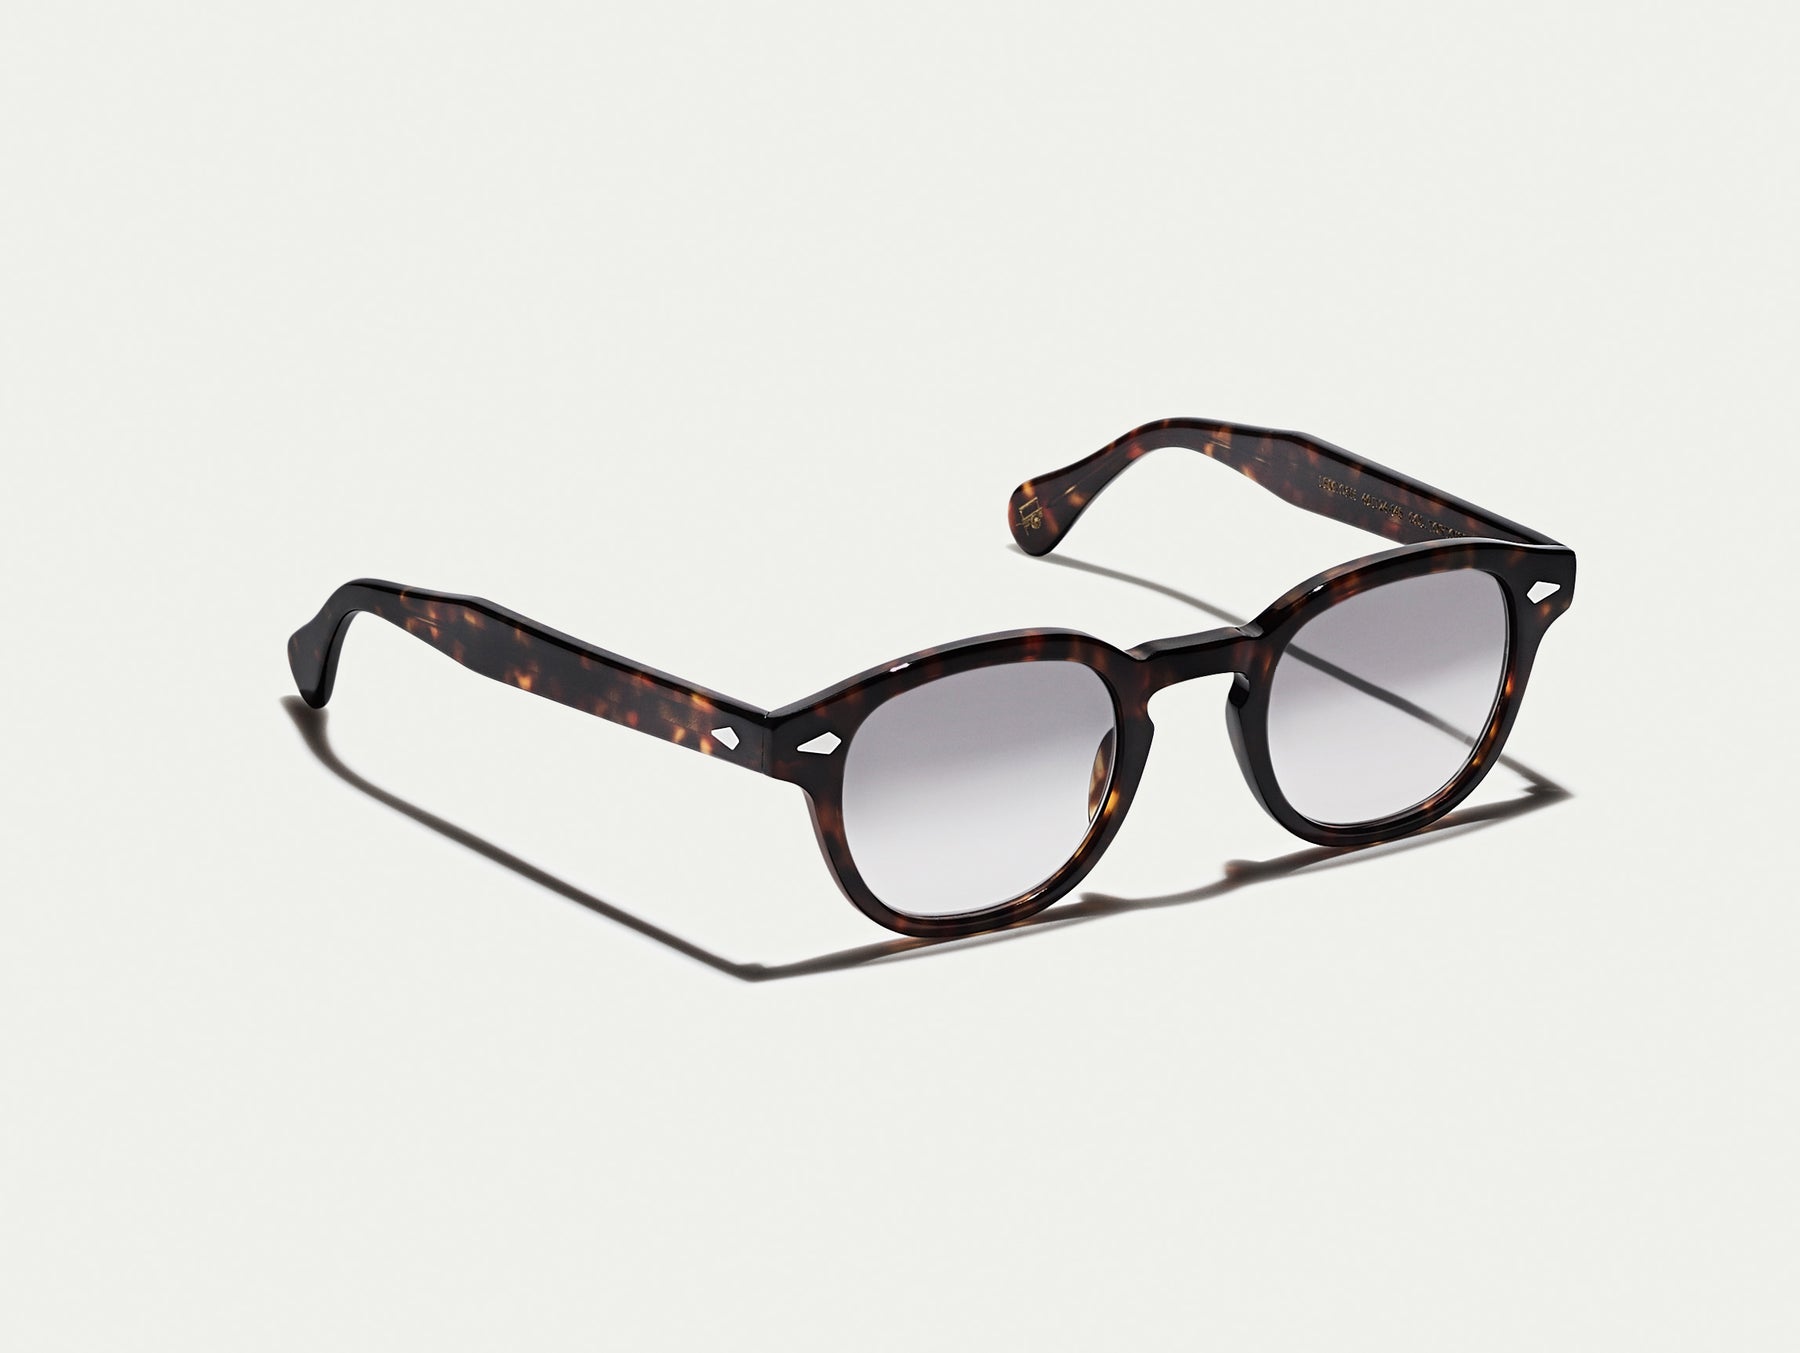 The LEMTOSH Tortoise with American Grey Fade Tinted Lenses